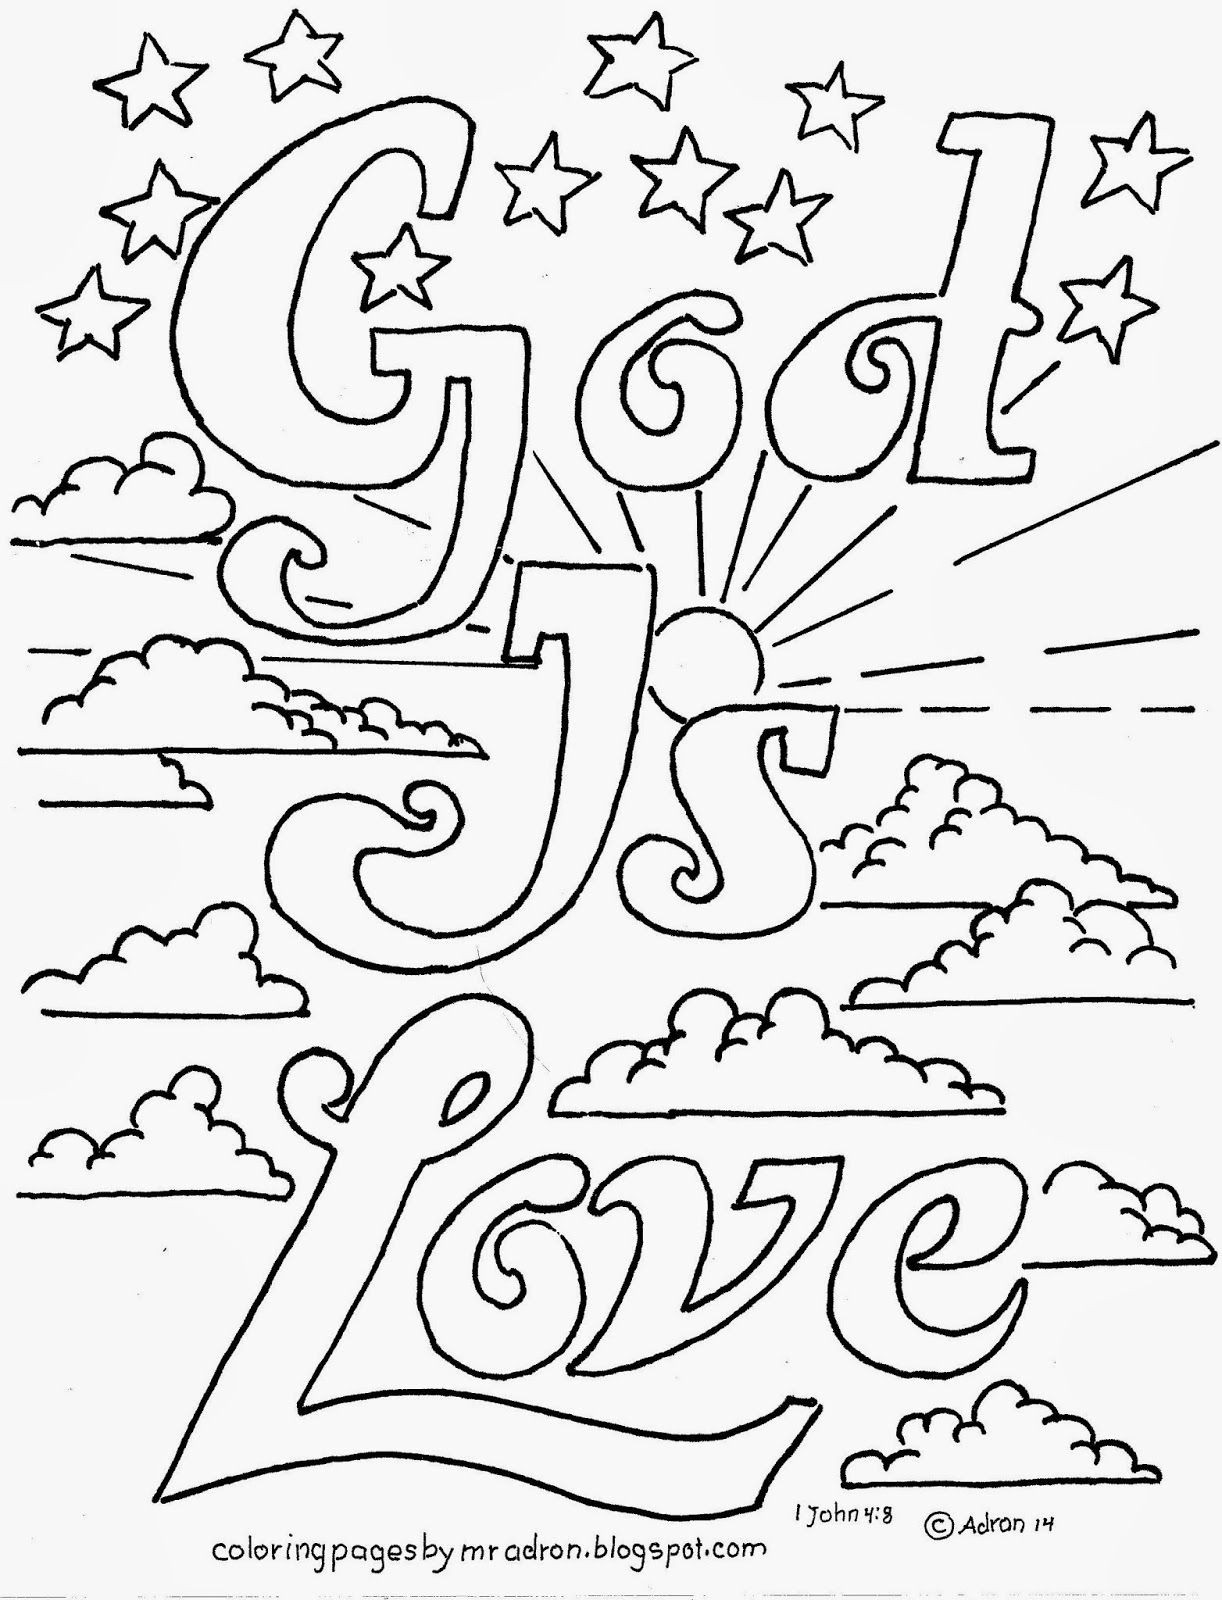 Sunday School Coloring Pages For Toddlers
 Coloring Pages for Kids by Mr Adron God Is Love